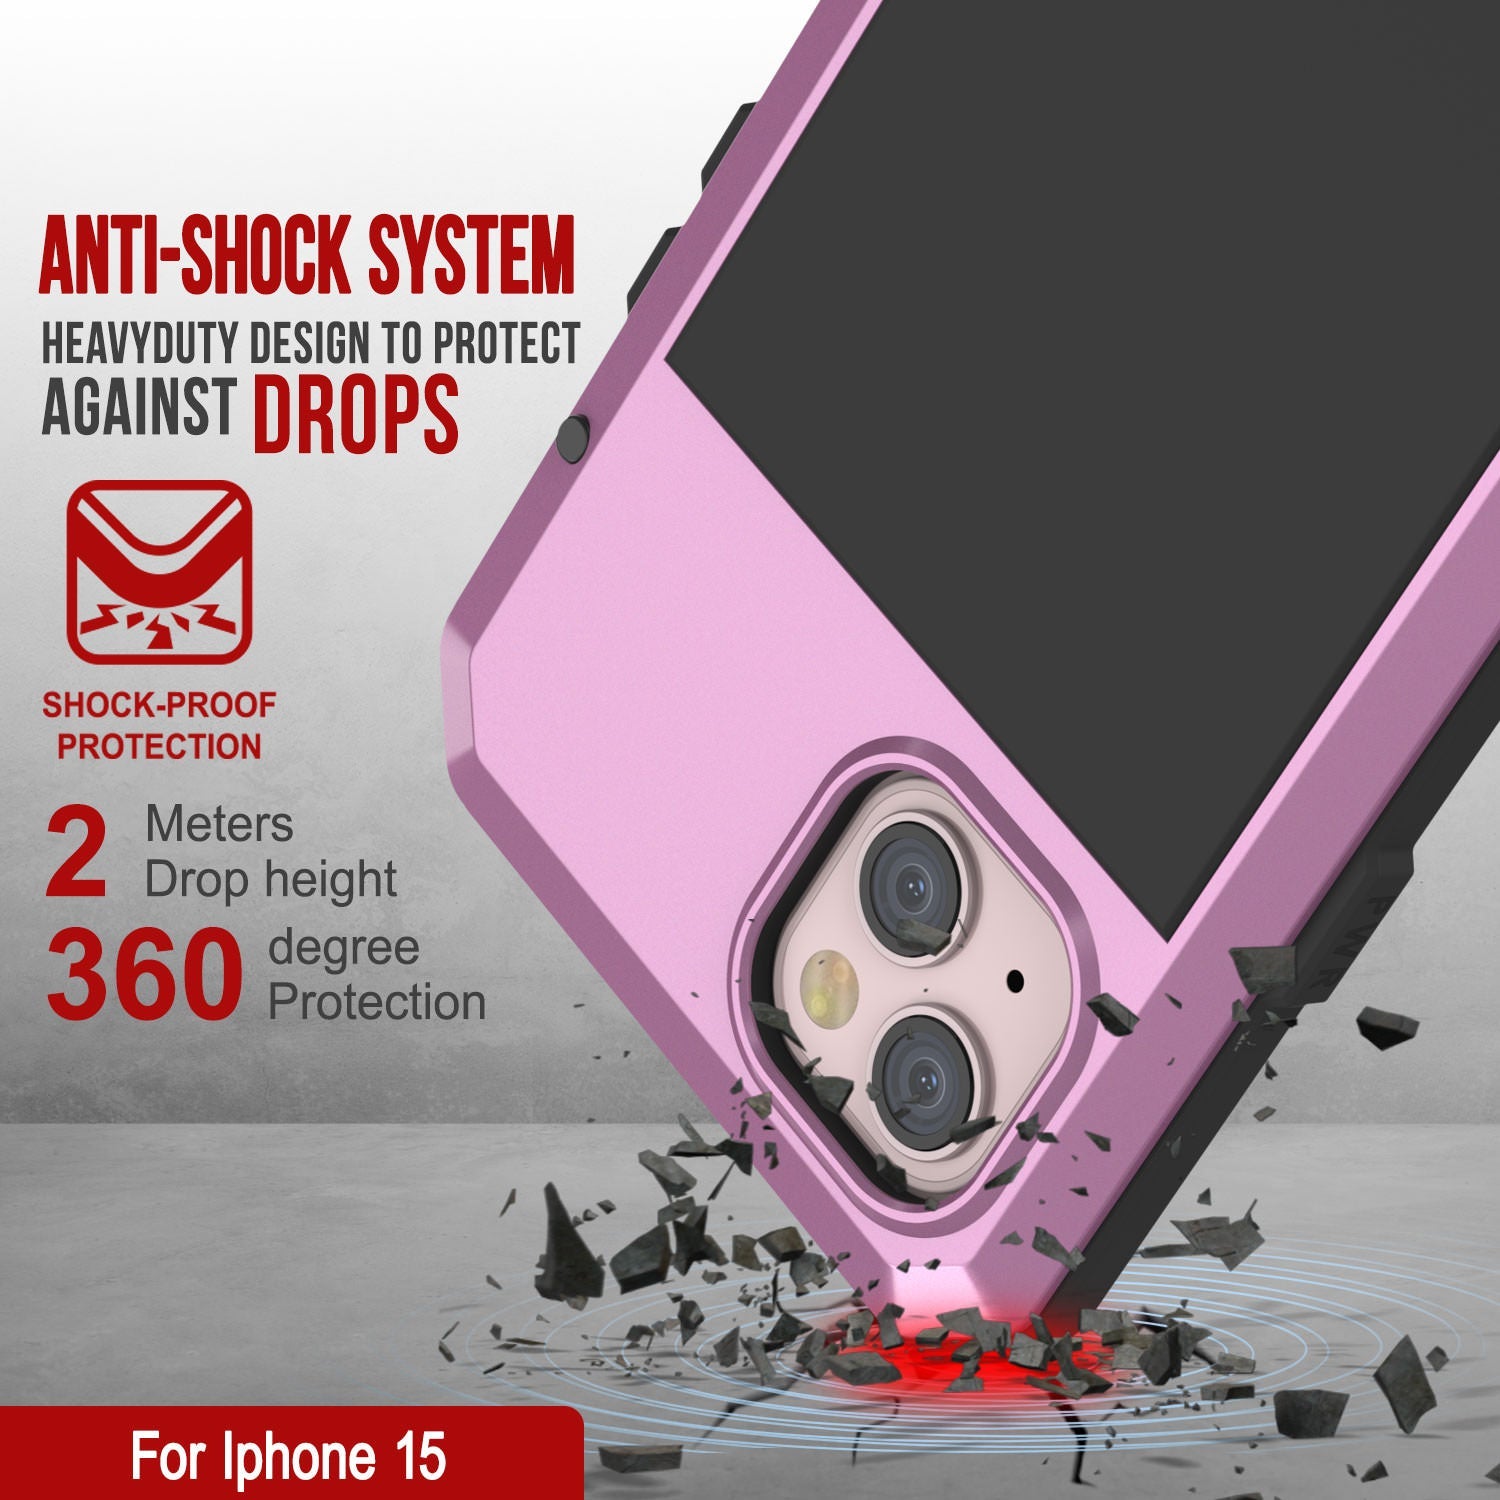 iPhone 15 Metal Case, Heavy Duty Military Grade Armor Cover [shock proof] Full Body Hard [Pink]